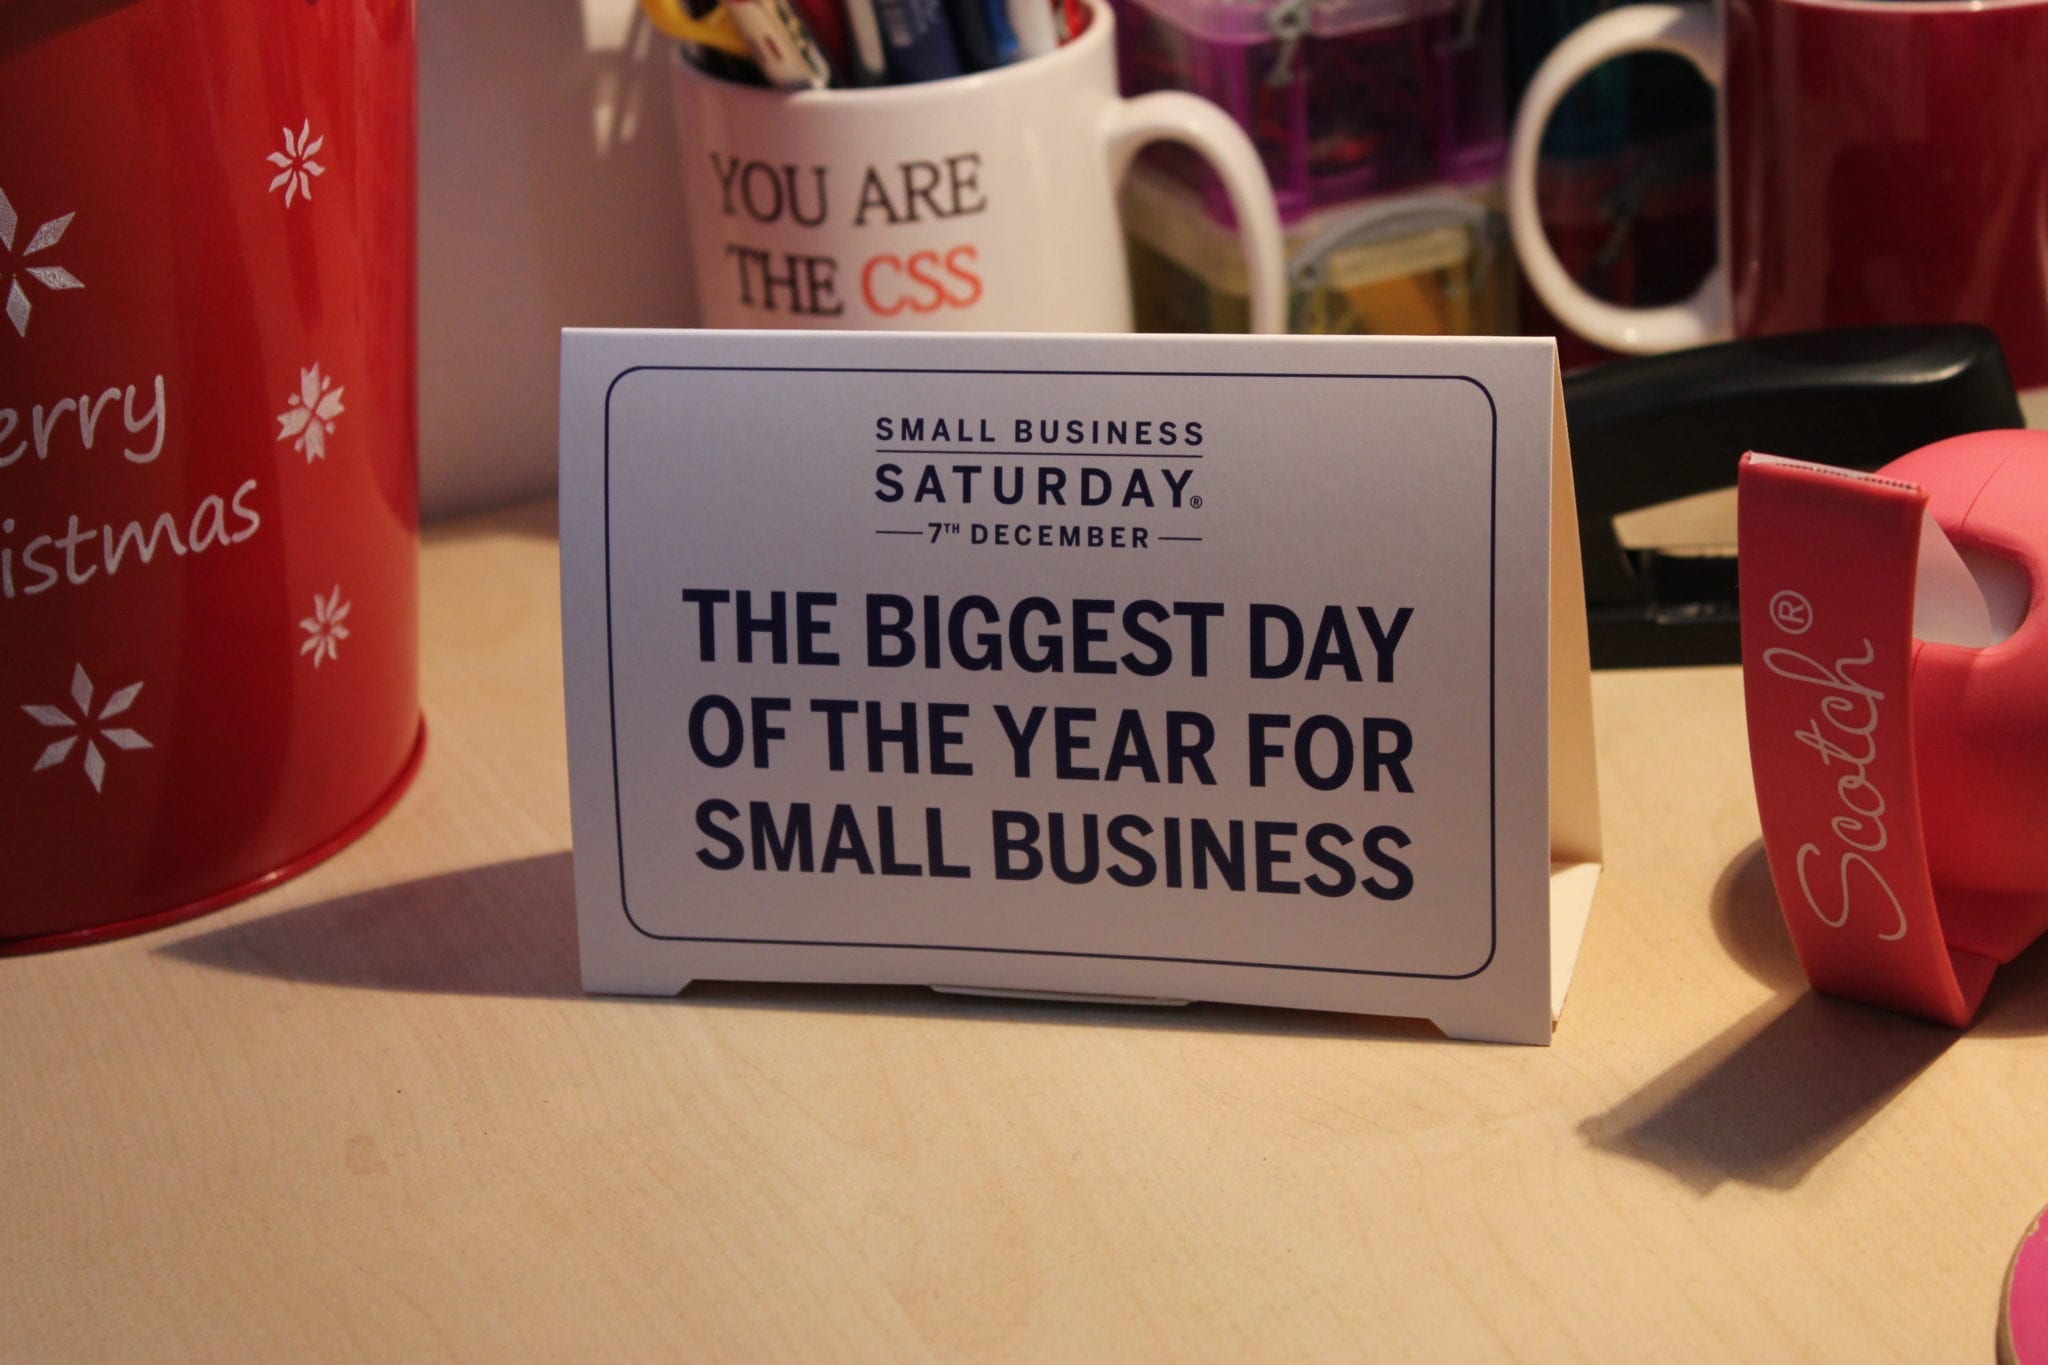 making-the-most-of-small-business-saturday-2013.jpg